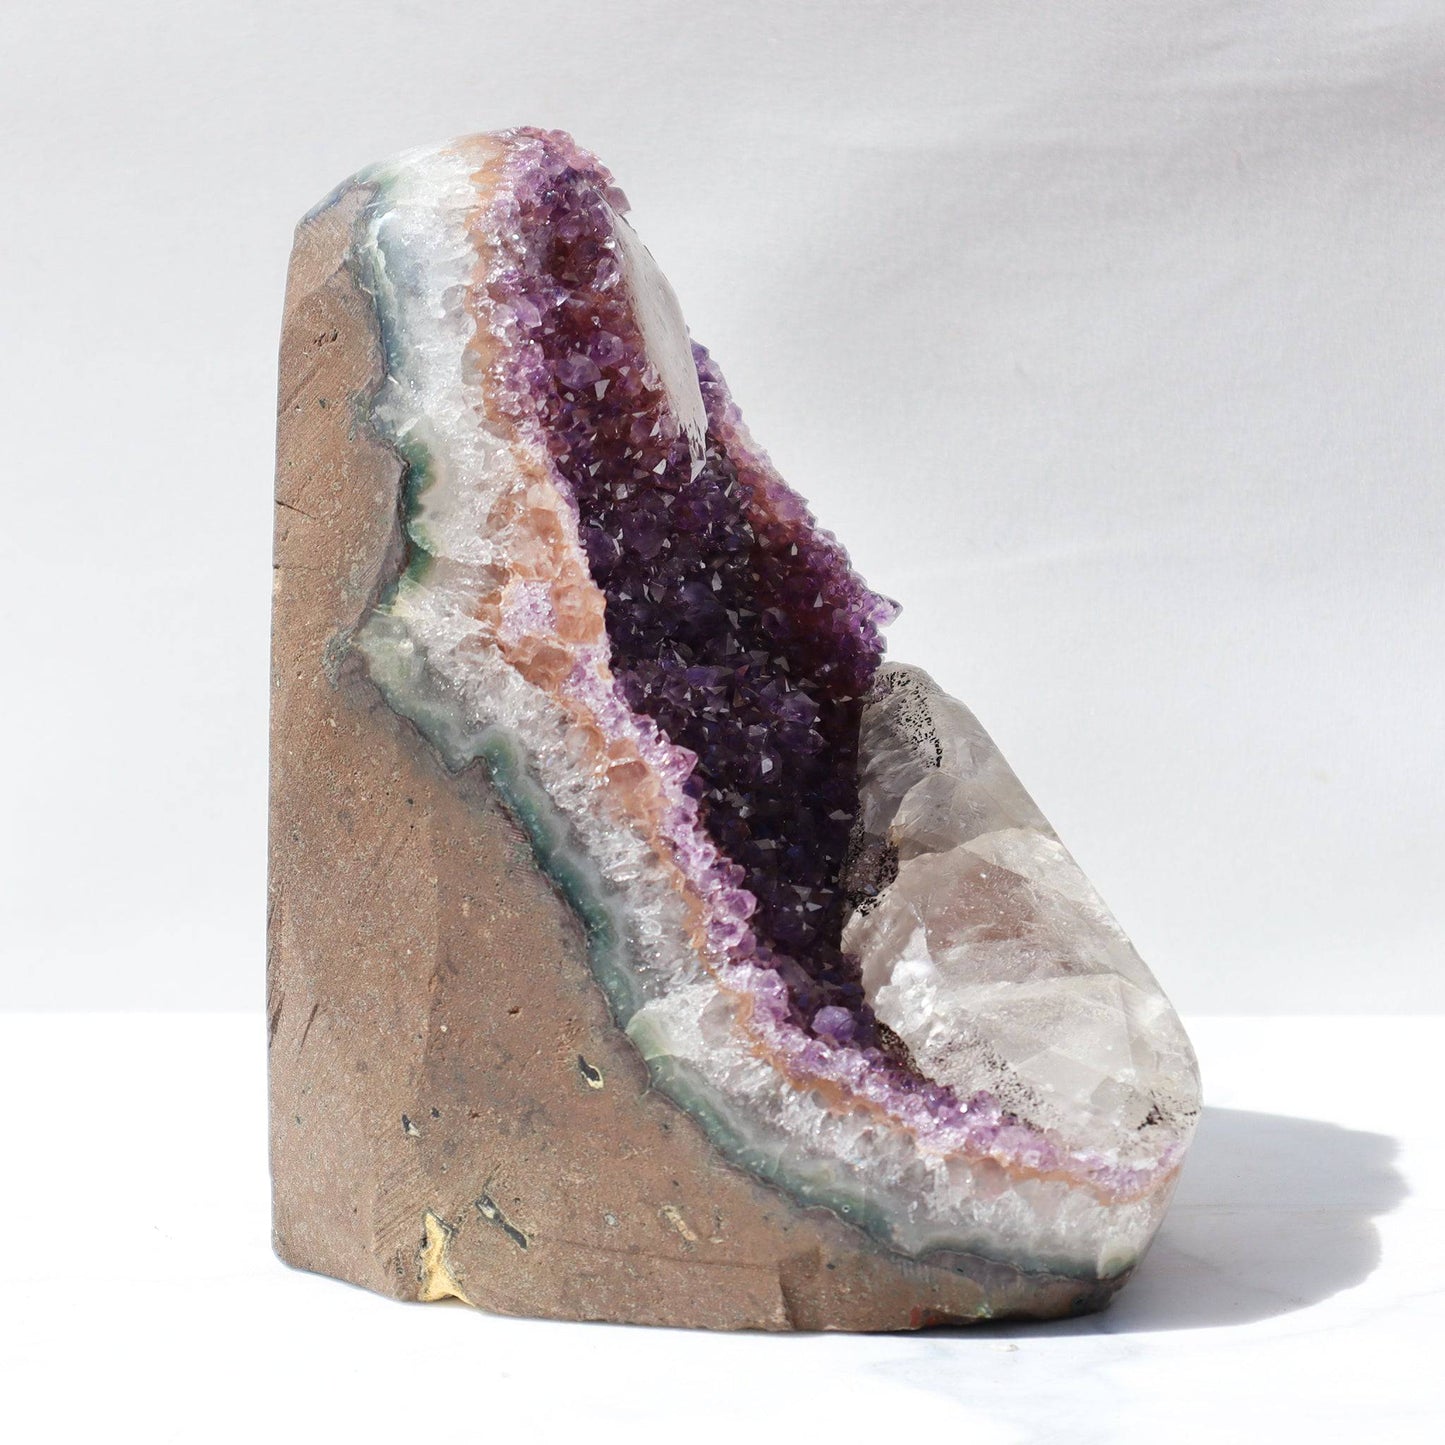 Showcase Geode Natural Art. Rare amethyst cut base with stalactite for sale, Uruguay - Deepest Earth